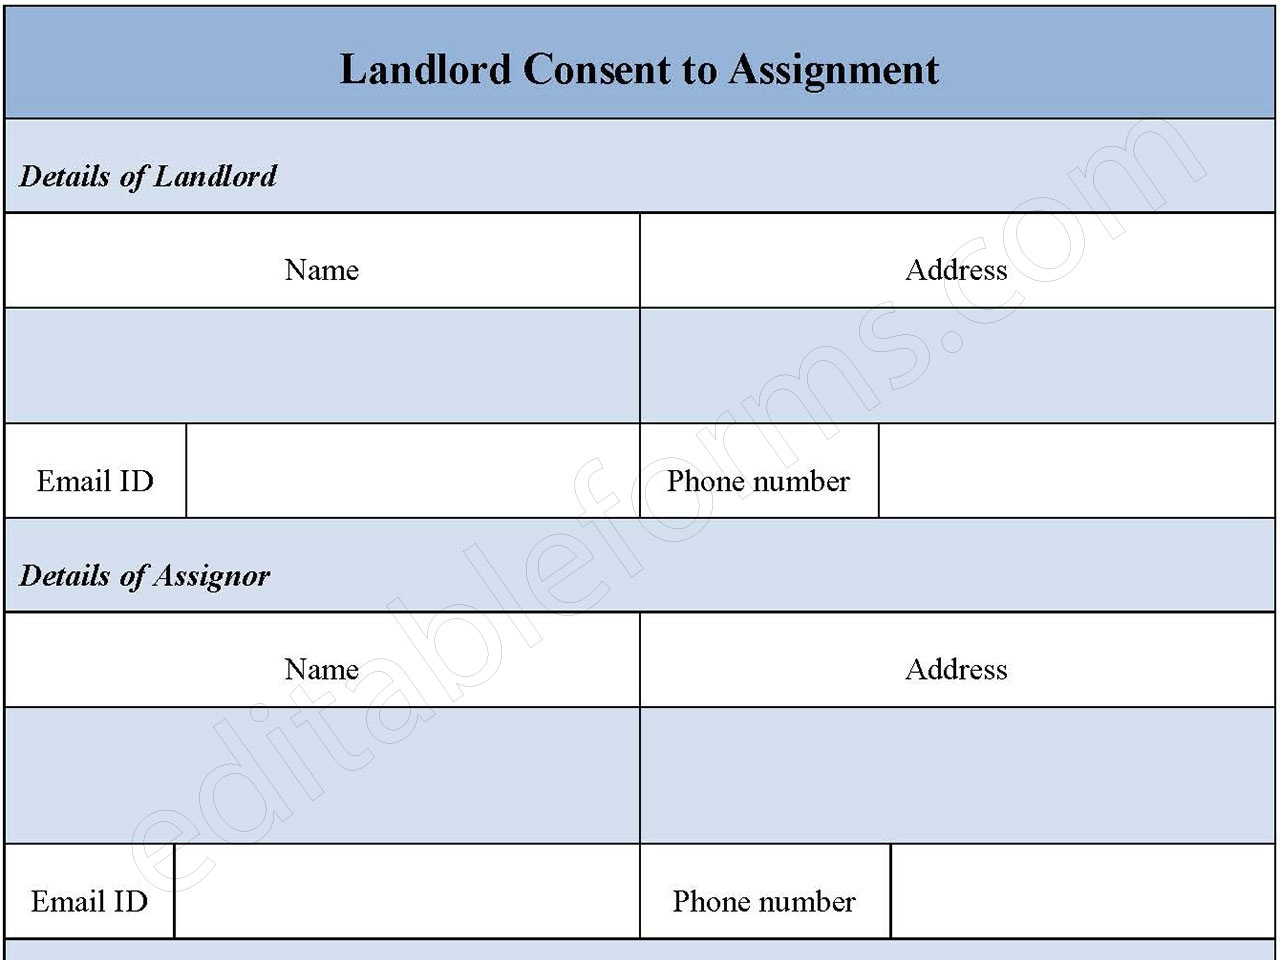 Landlord Consent to Assignment Form